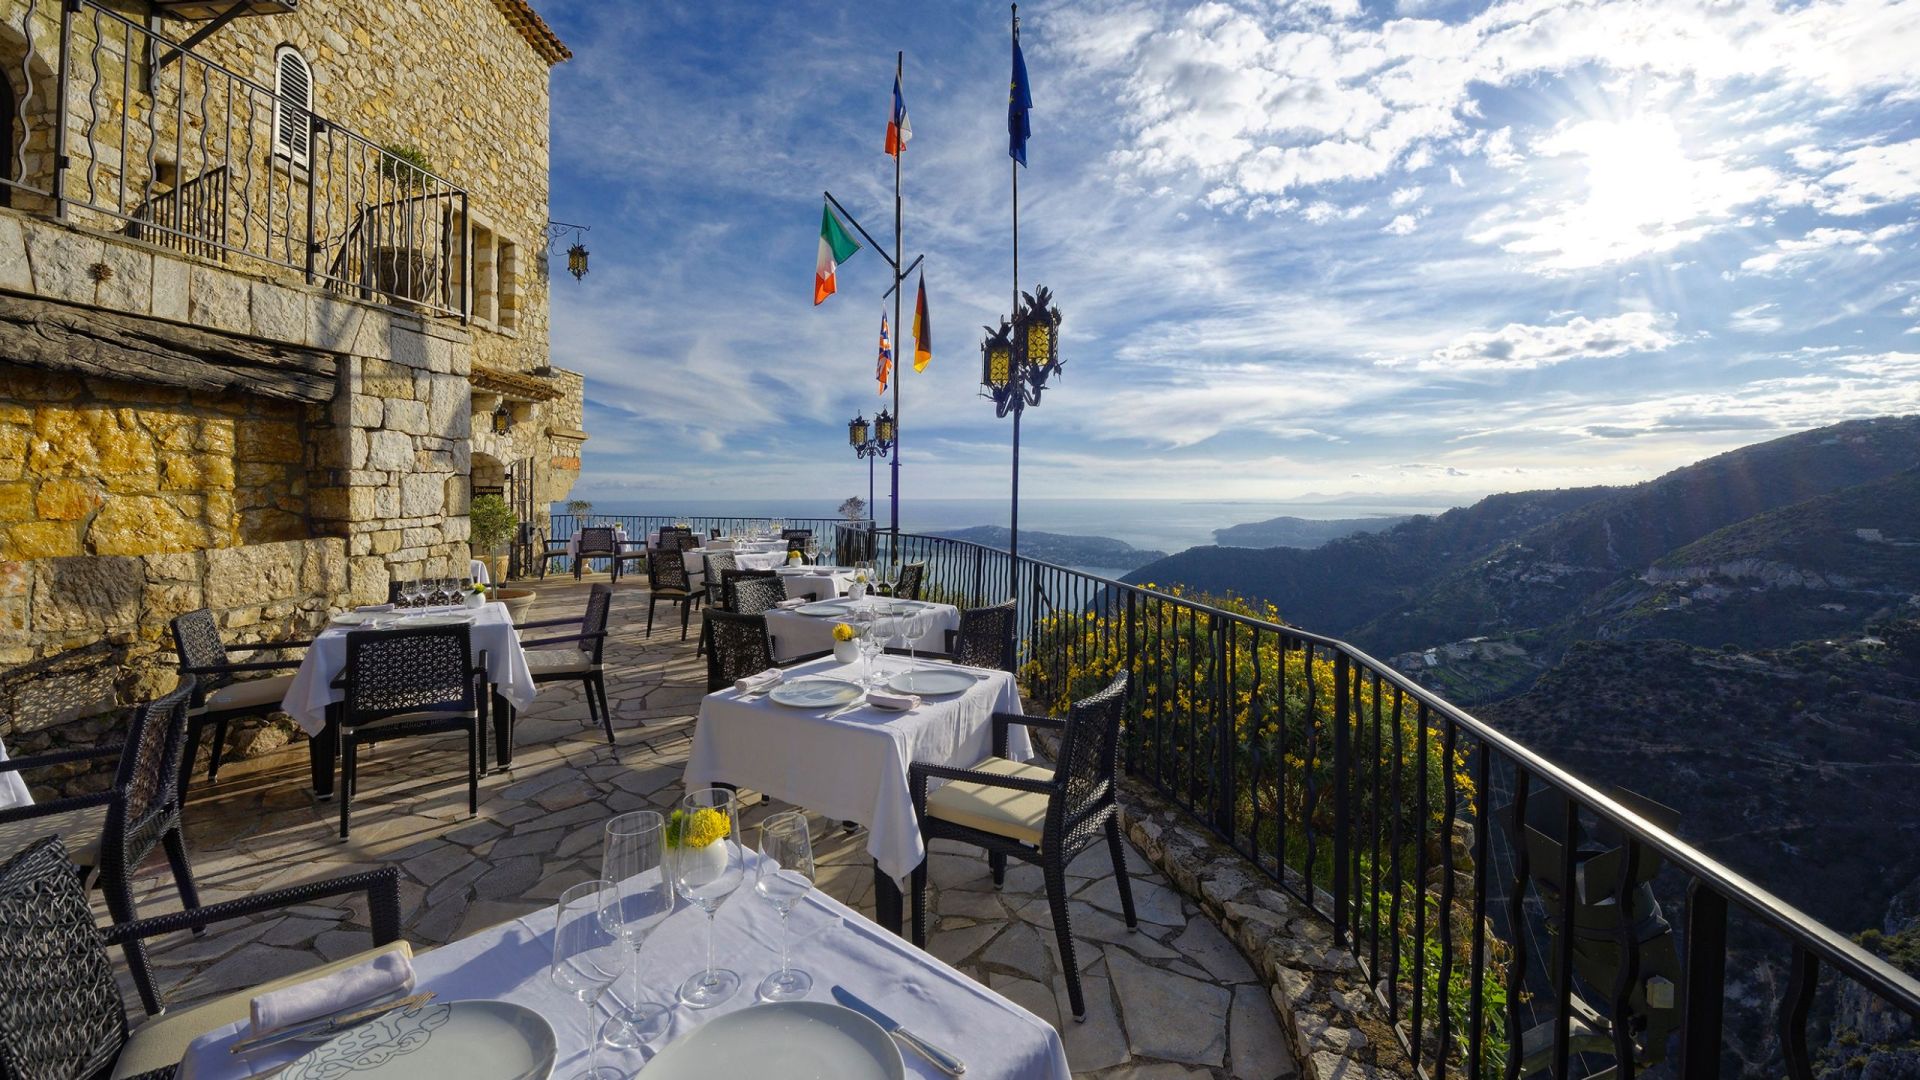 a restaurant with tables and chairs on a patio overlooking a mountain